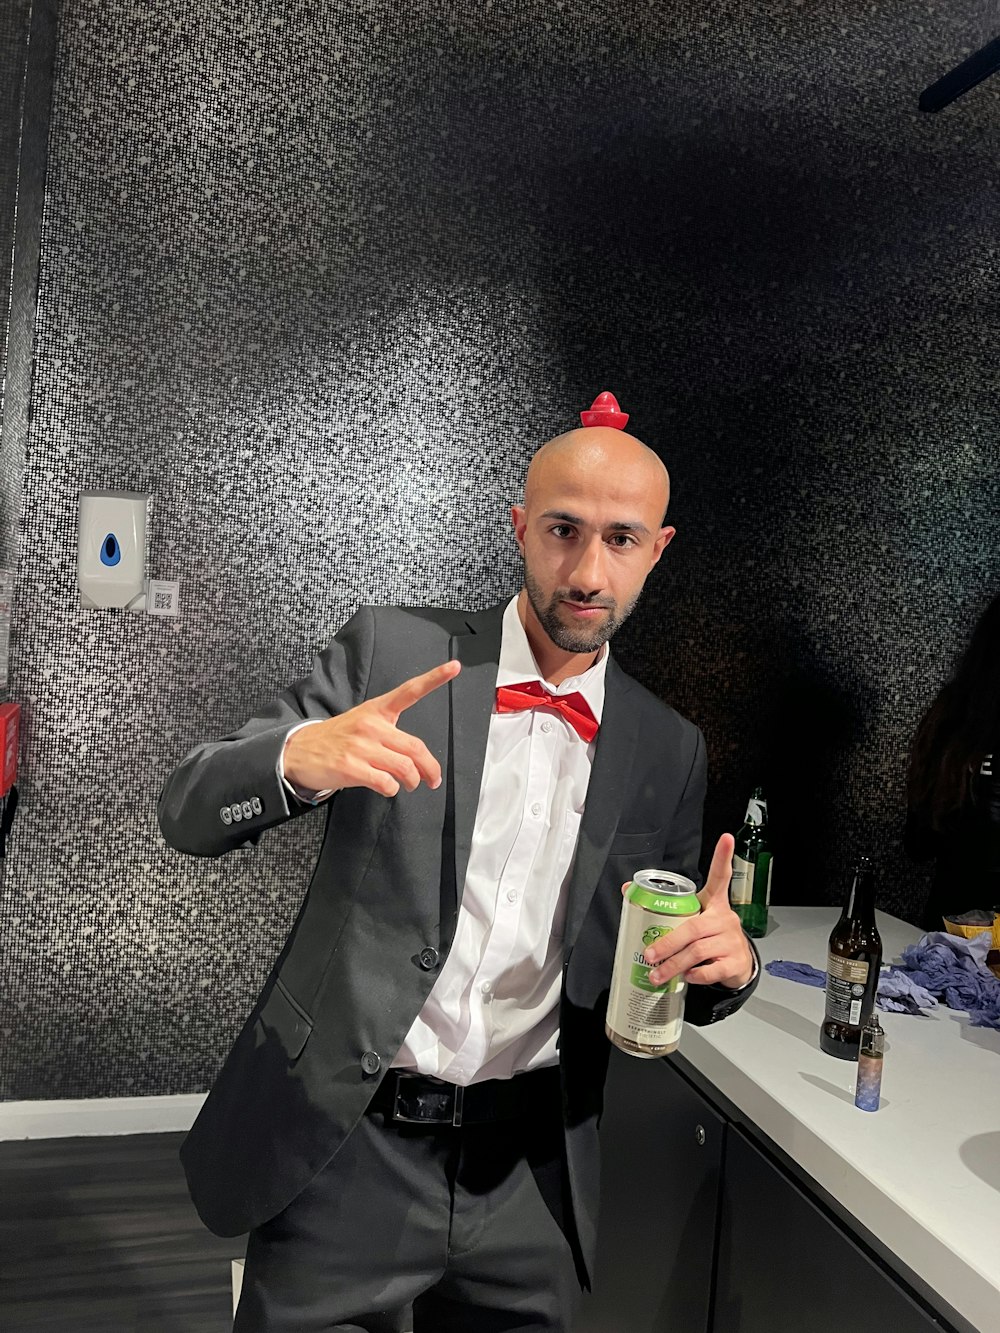 a man in a suit and bow tie holding a drink